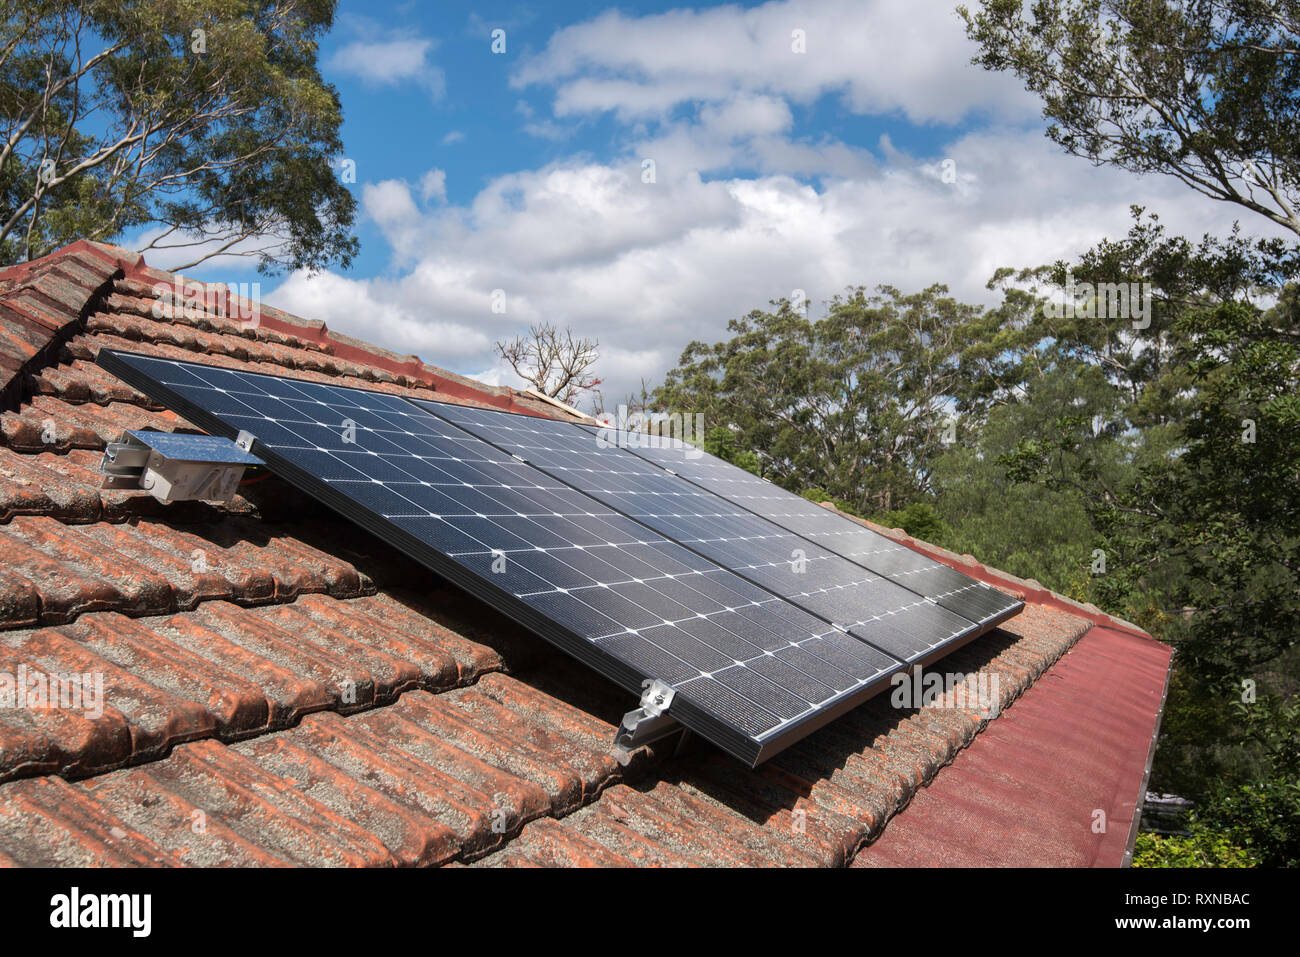 An array of roof top solar photo voltaic (PV) panels on a home in Sydney Australia. These panels are all installed with individual micro inverters. Stock Photo